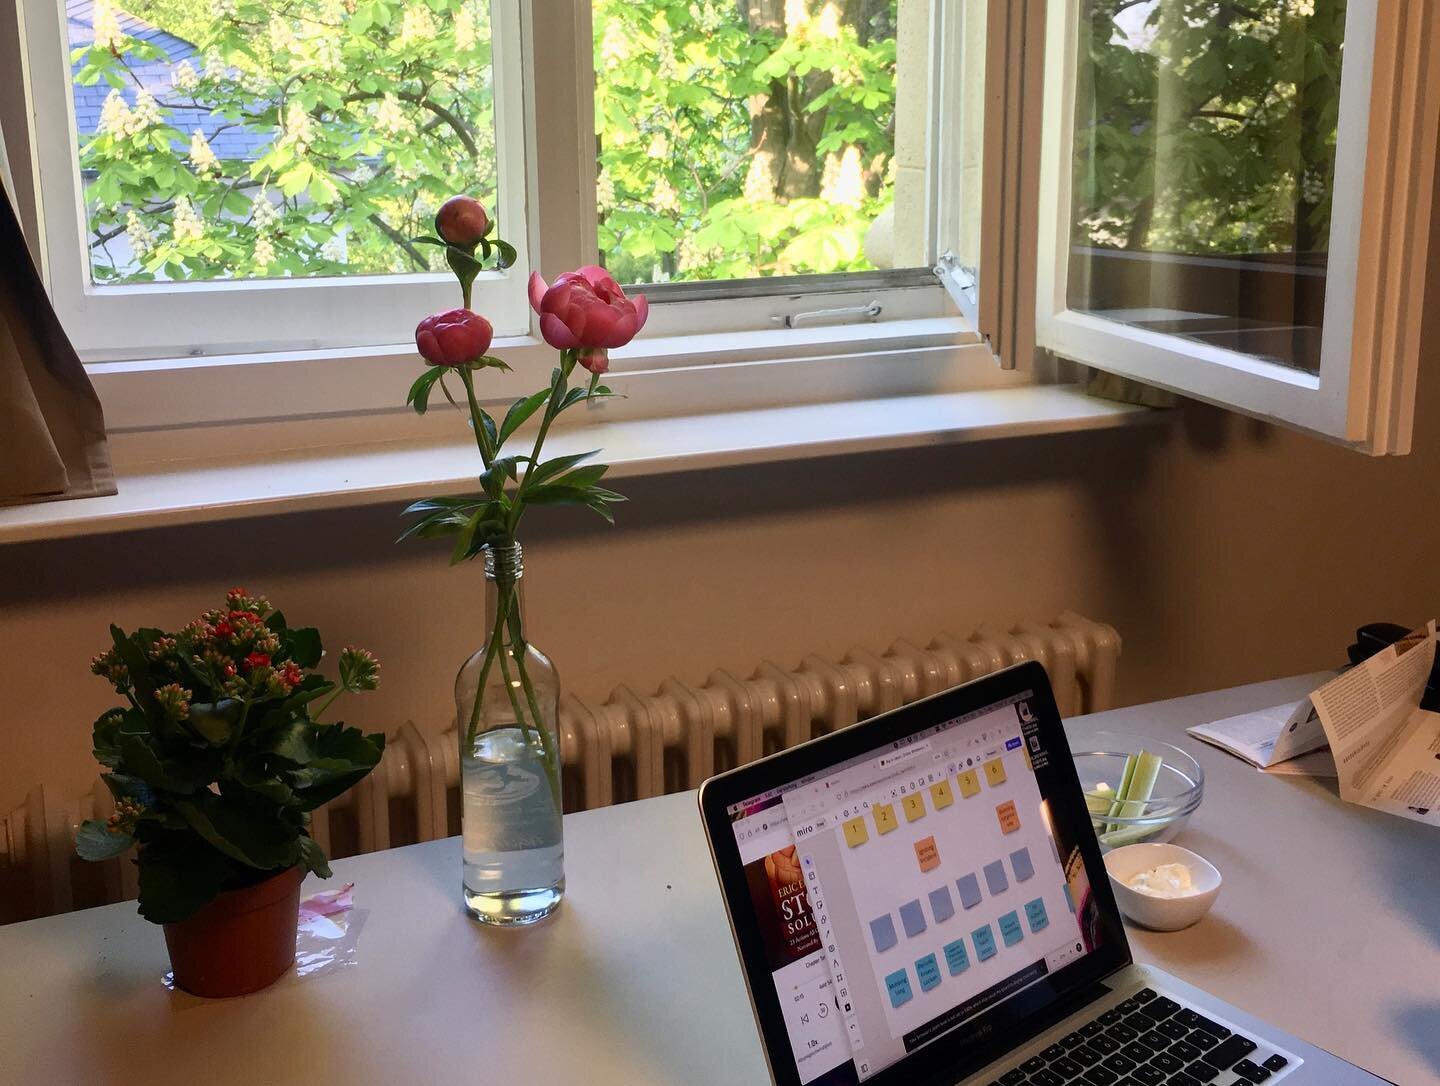 Photodump May '23: 

1) my desk at @lcb.berlin at Berlin Wannsee where I spent my last month as writer in residency 

2) the actual Wannsee Villa where the residency takes place. And it is and feels as lovely as it looks in the picture (a very rare t